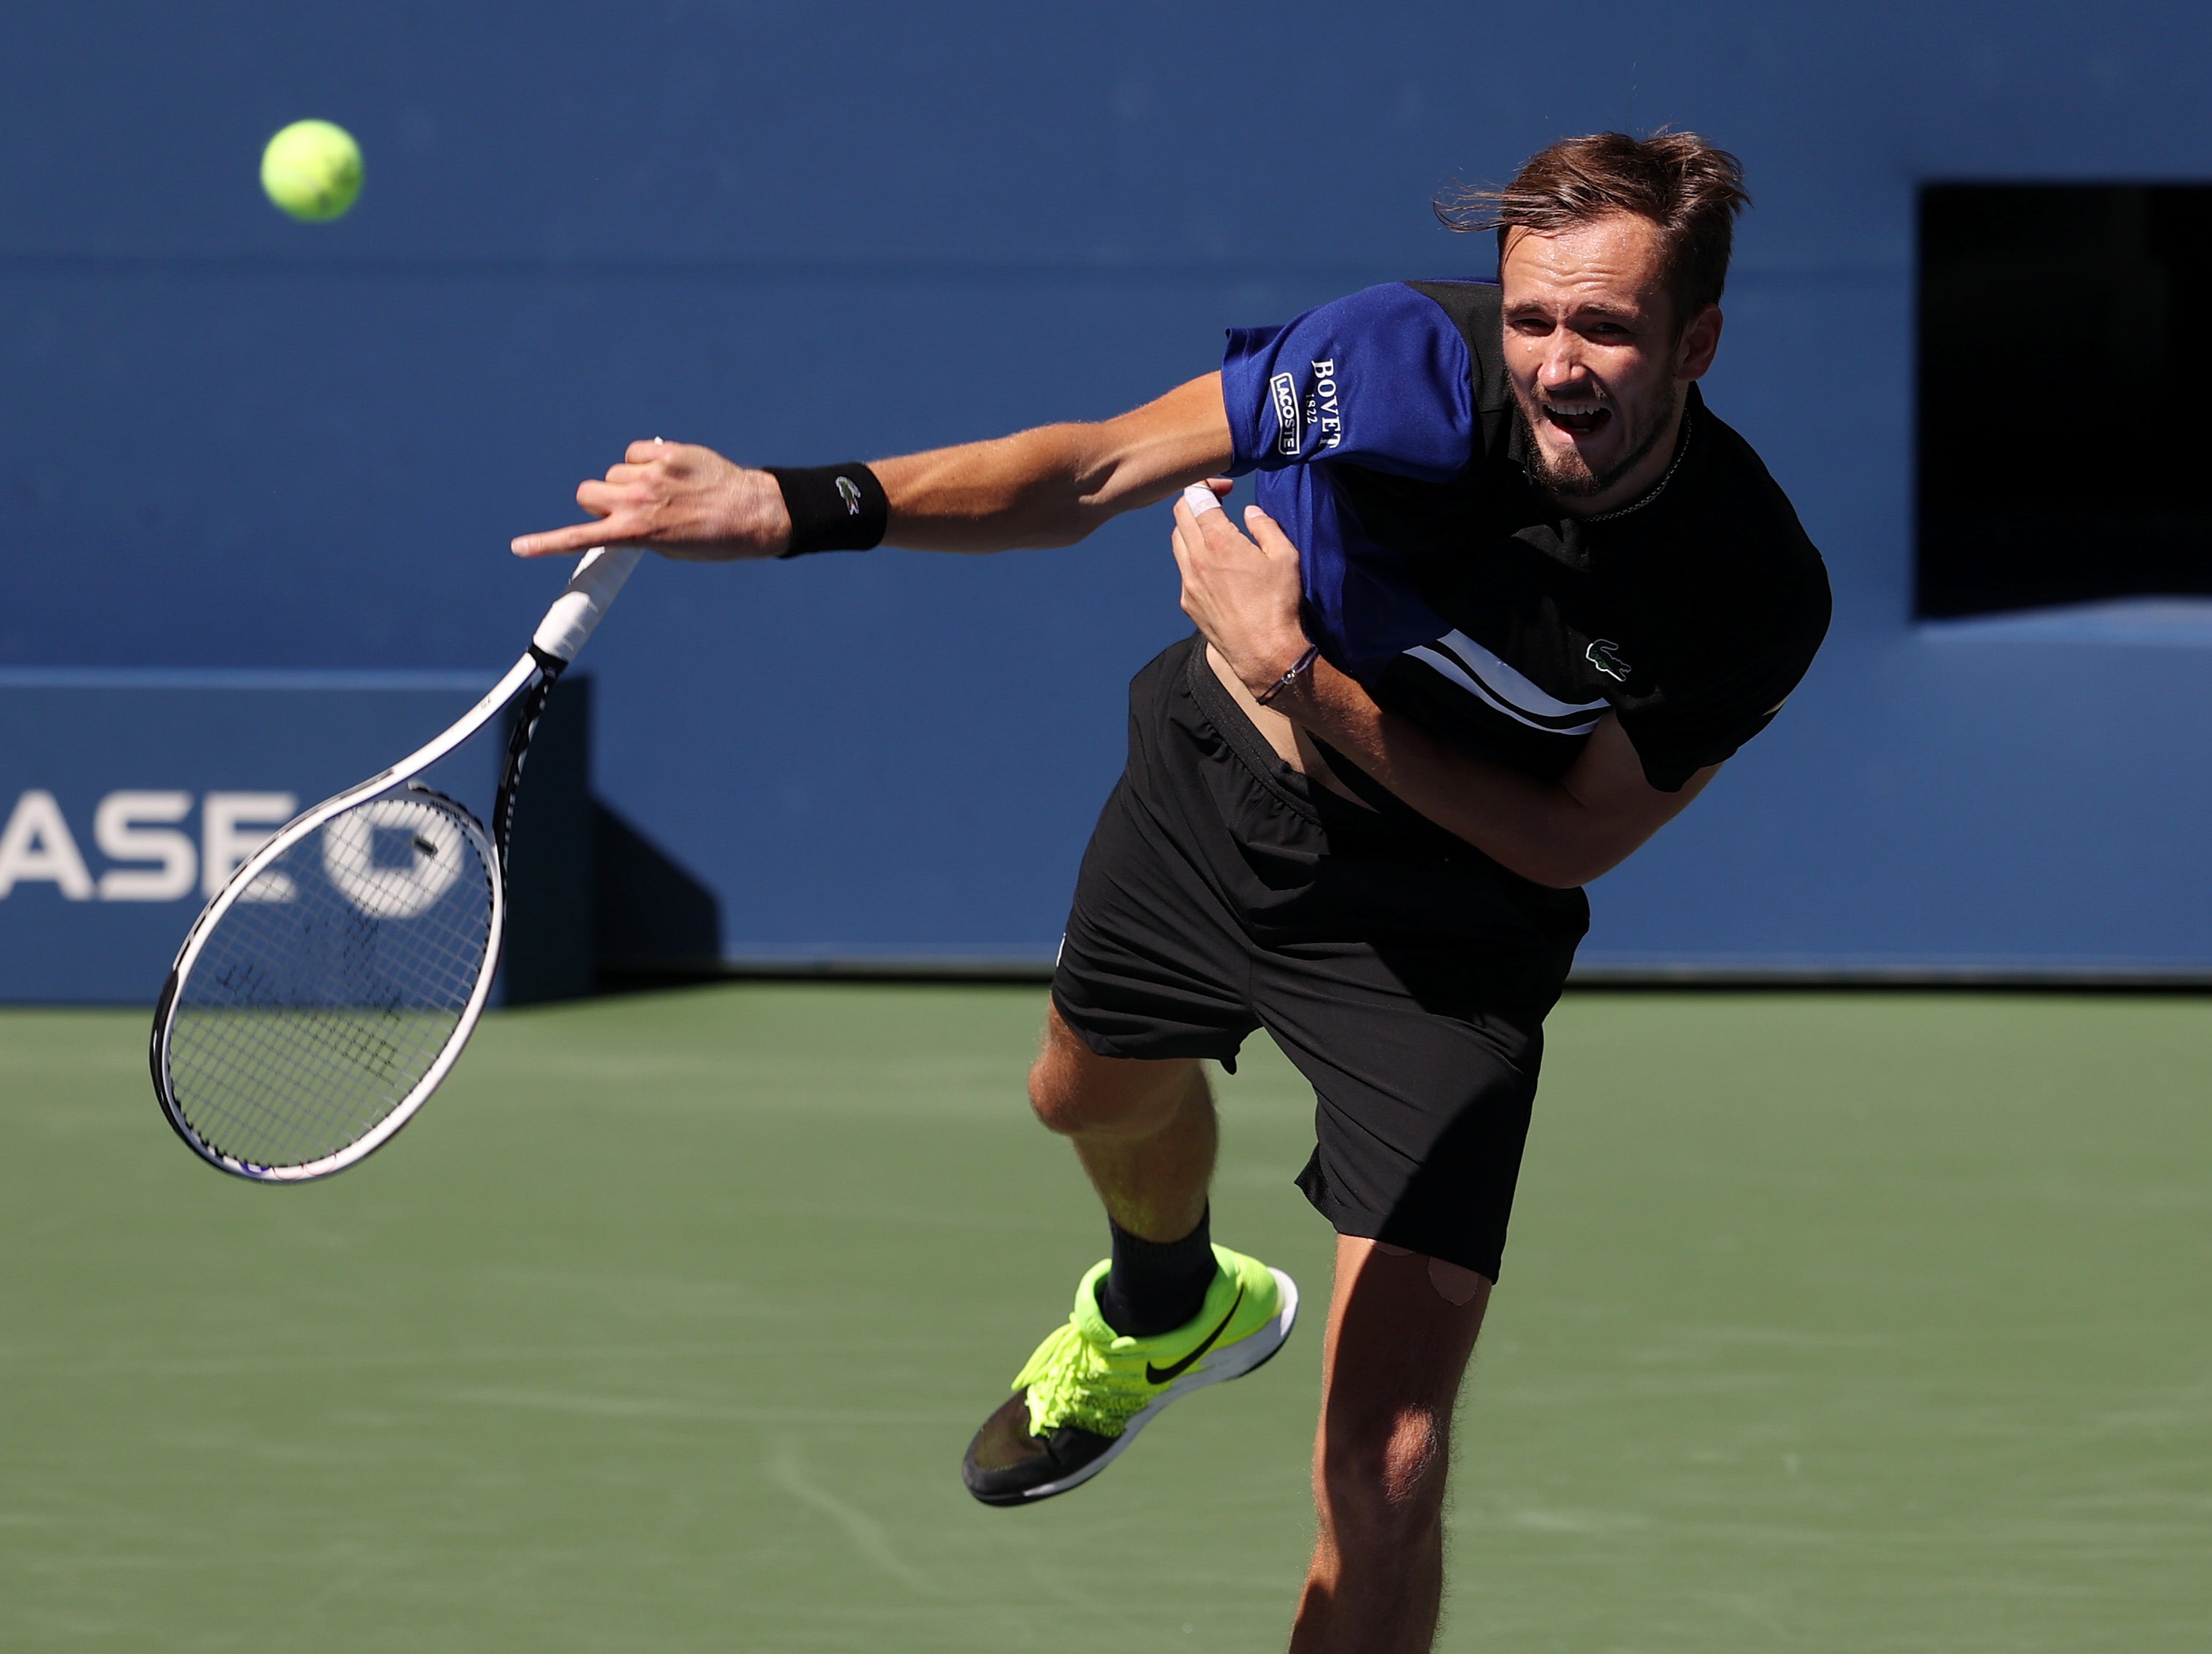 US Open Daniil Medvedev eases into fourth round with straightforward win over JJ Wolf The Independent